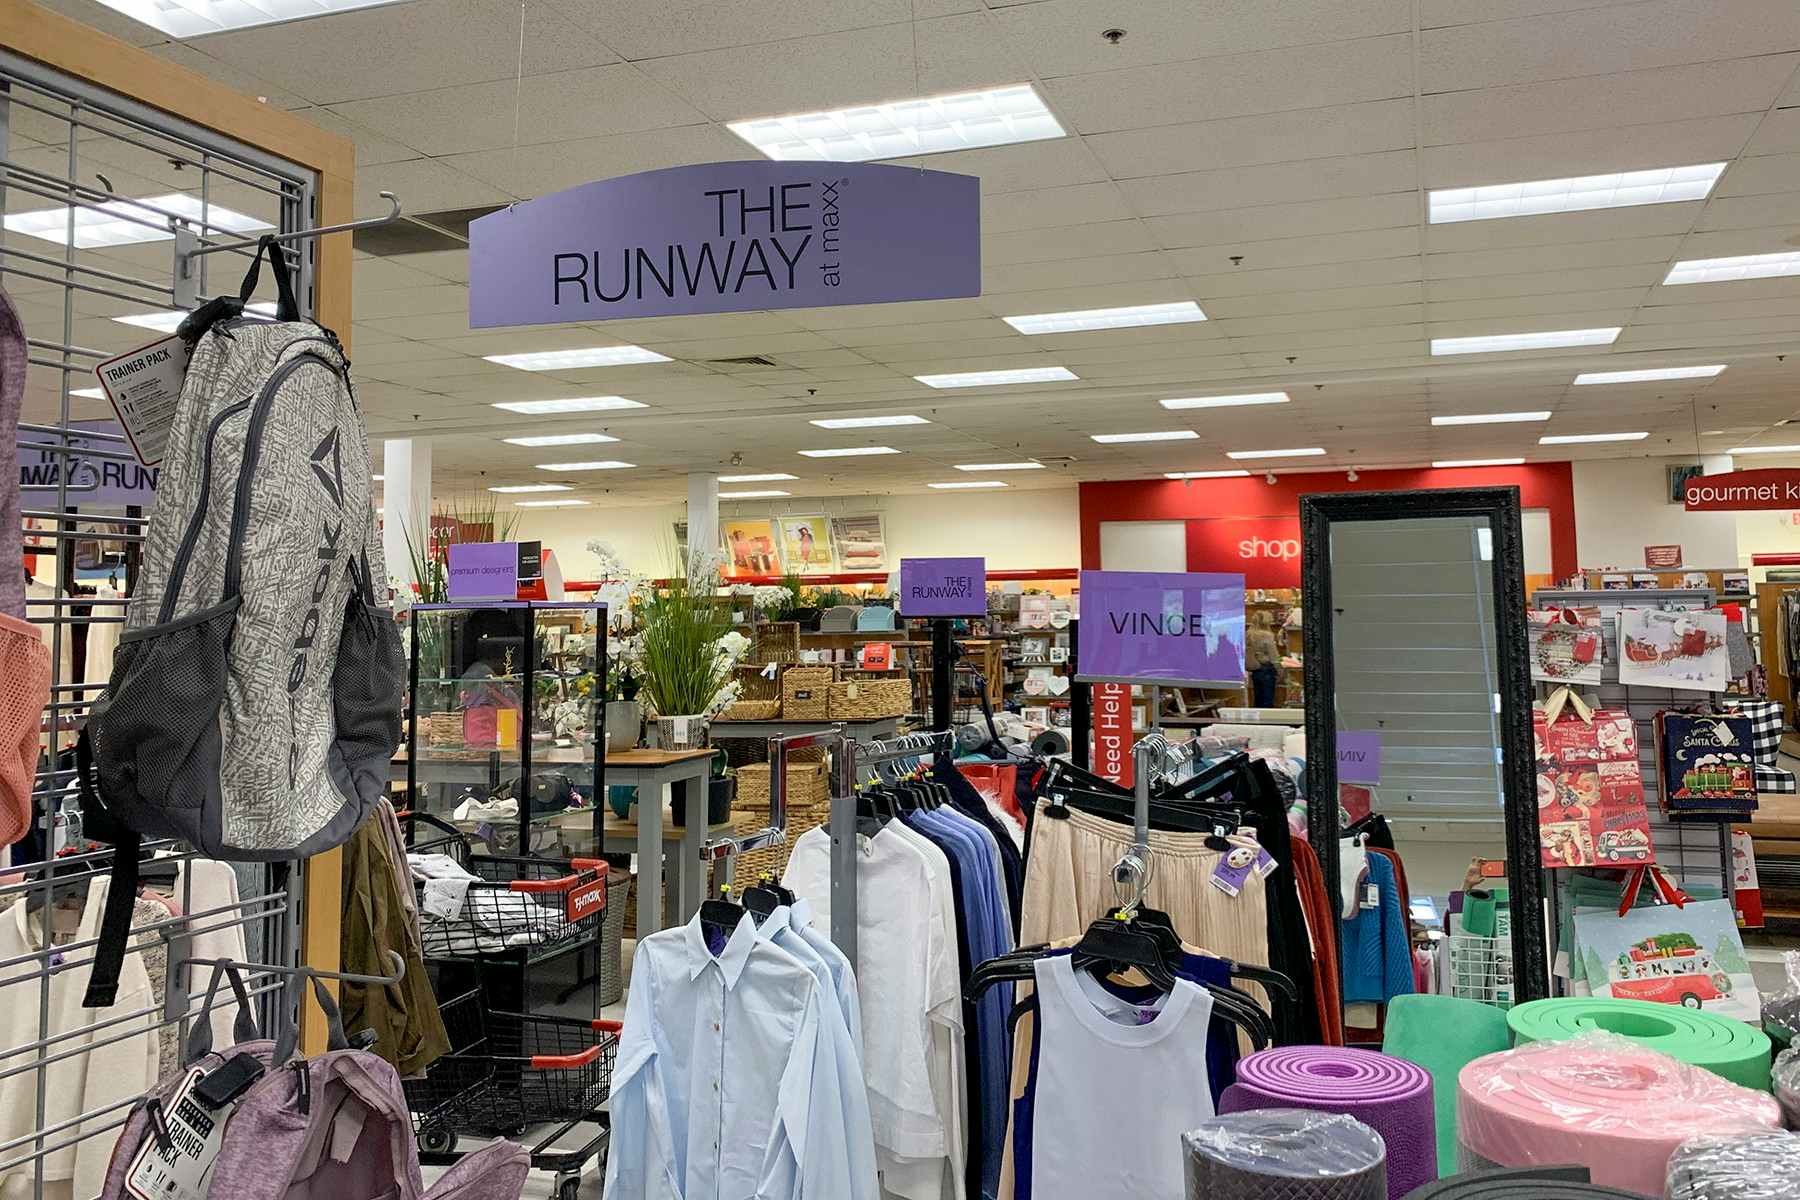 All About T.J.Maxx Return Policy: Can You Return Marshalls at T.J. Maxx? -  The Krazy Coupon Lady